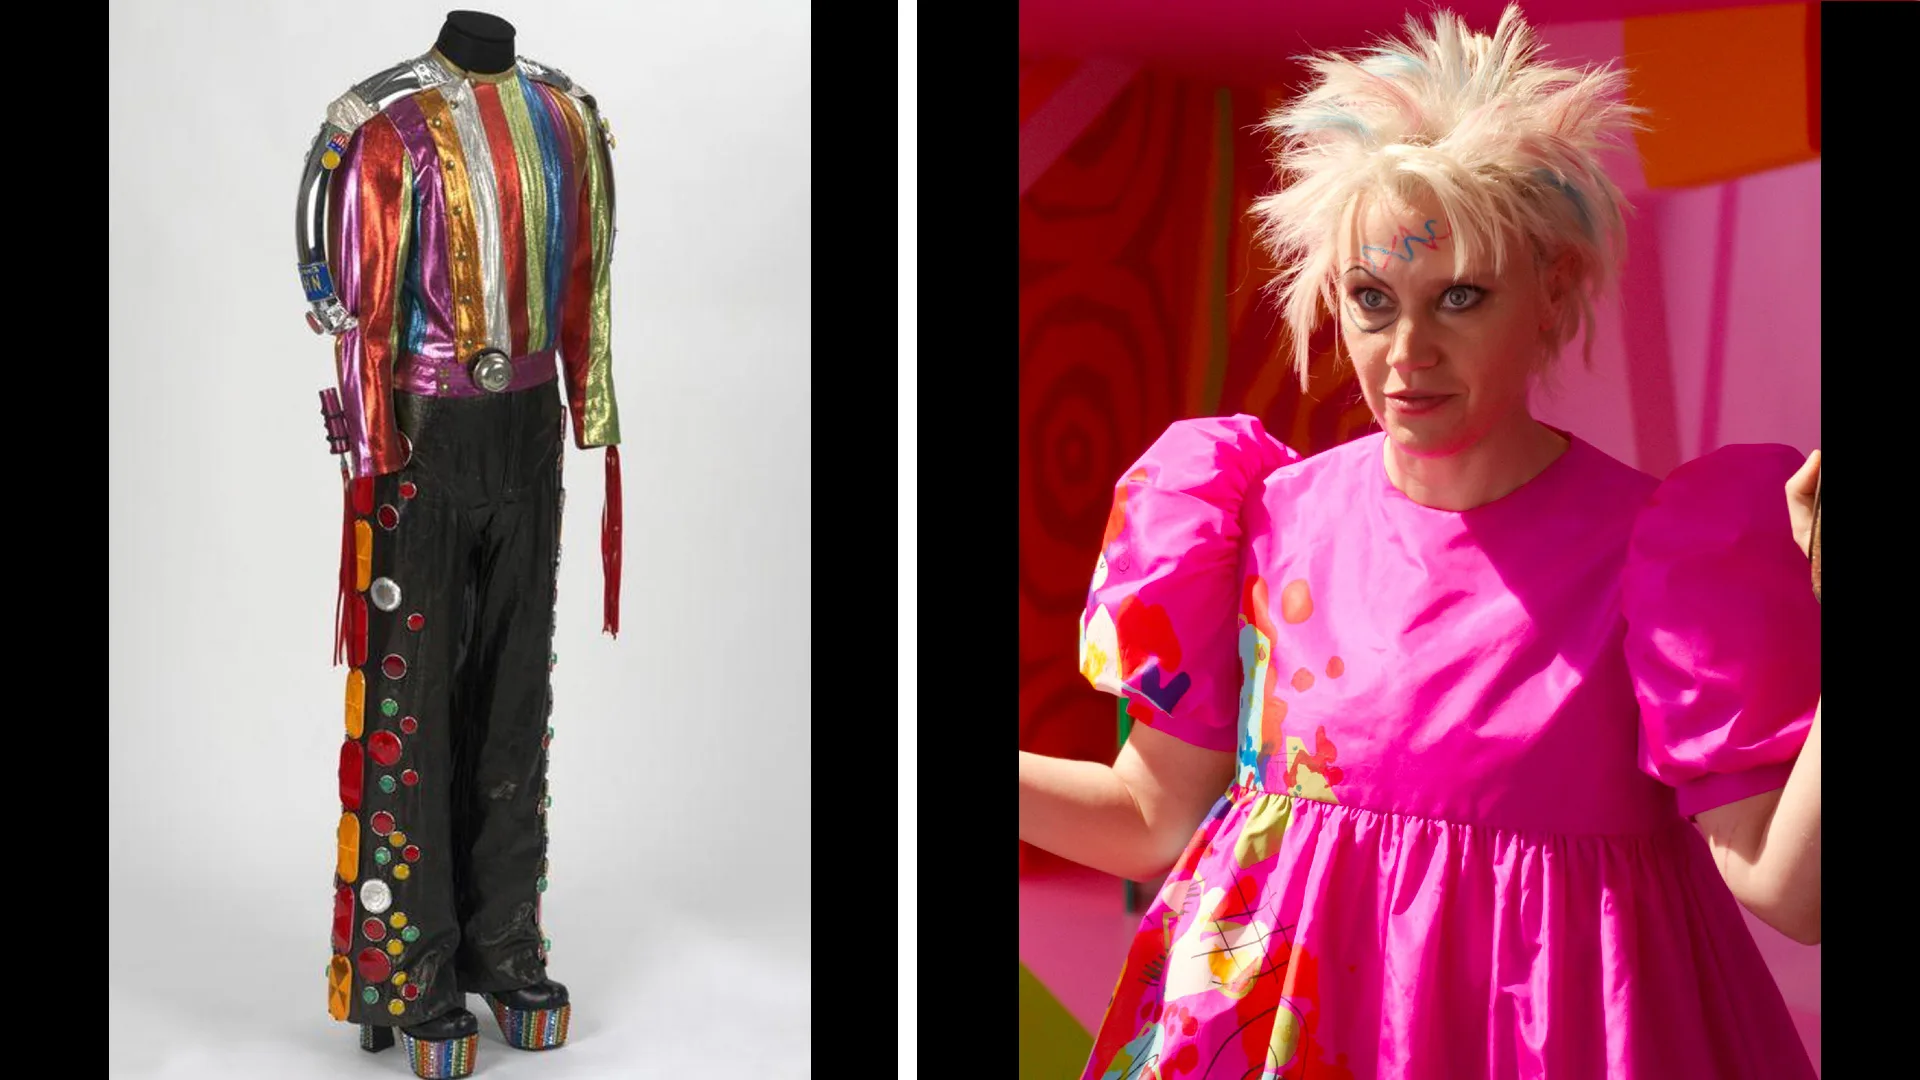 Photograph of Elton John's rainbow metallic costume from Rock and Pop next to a photograph of Weird Barbie